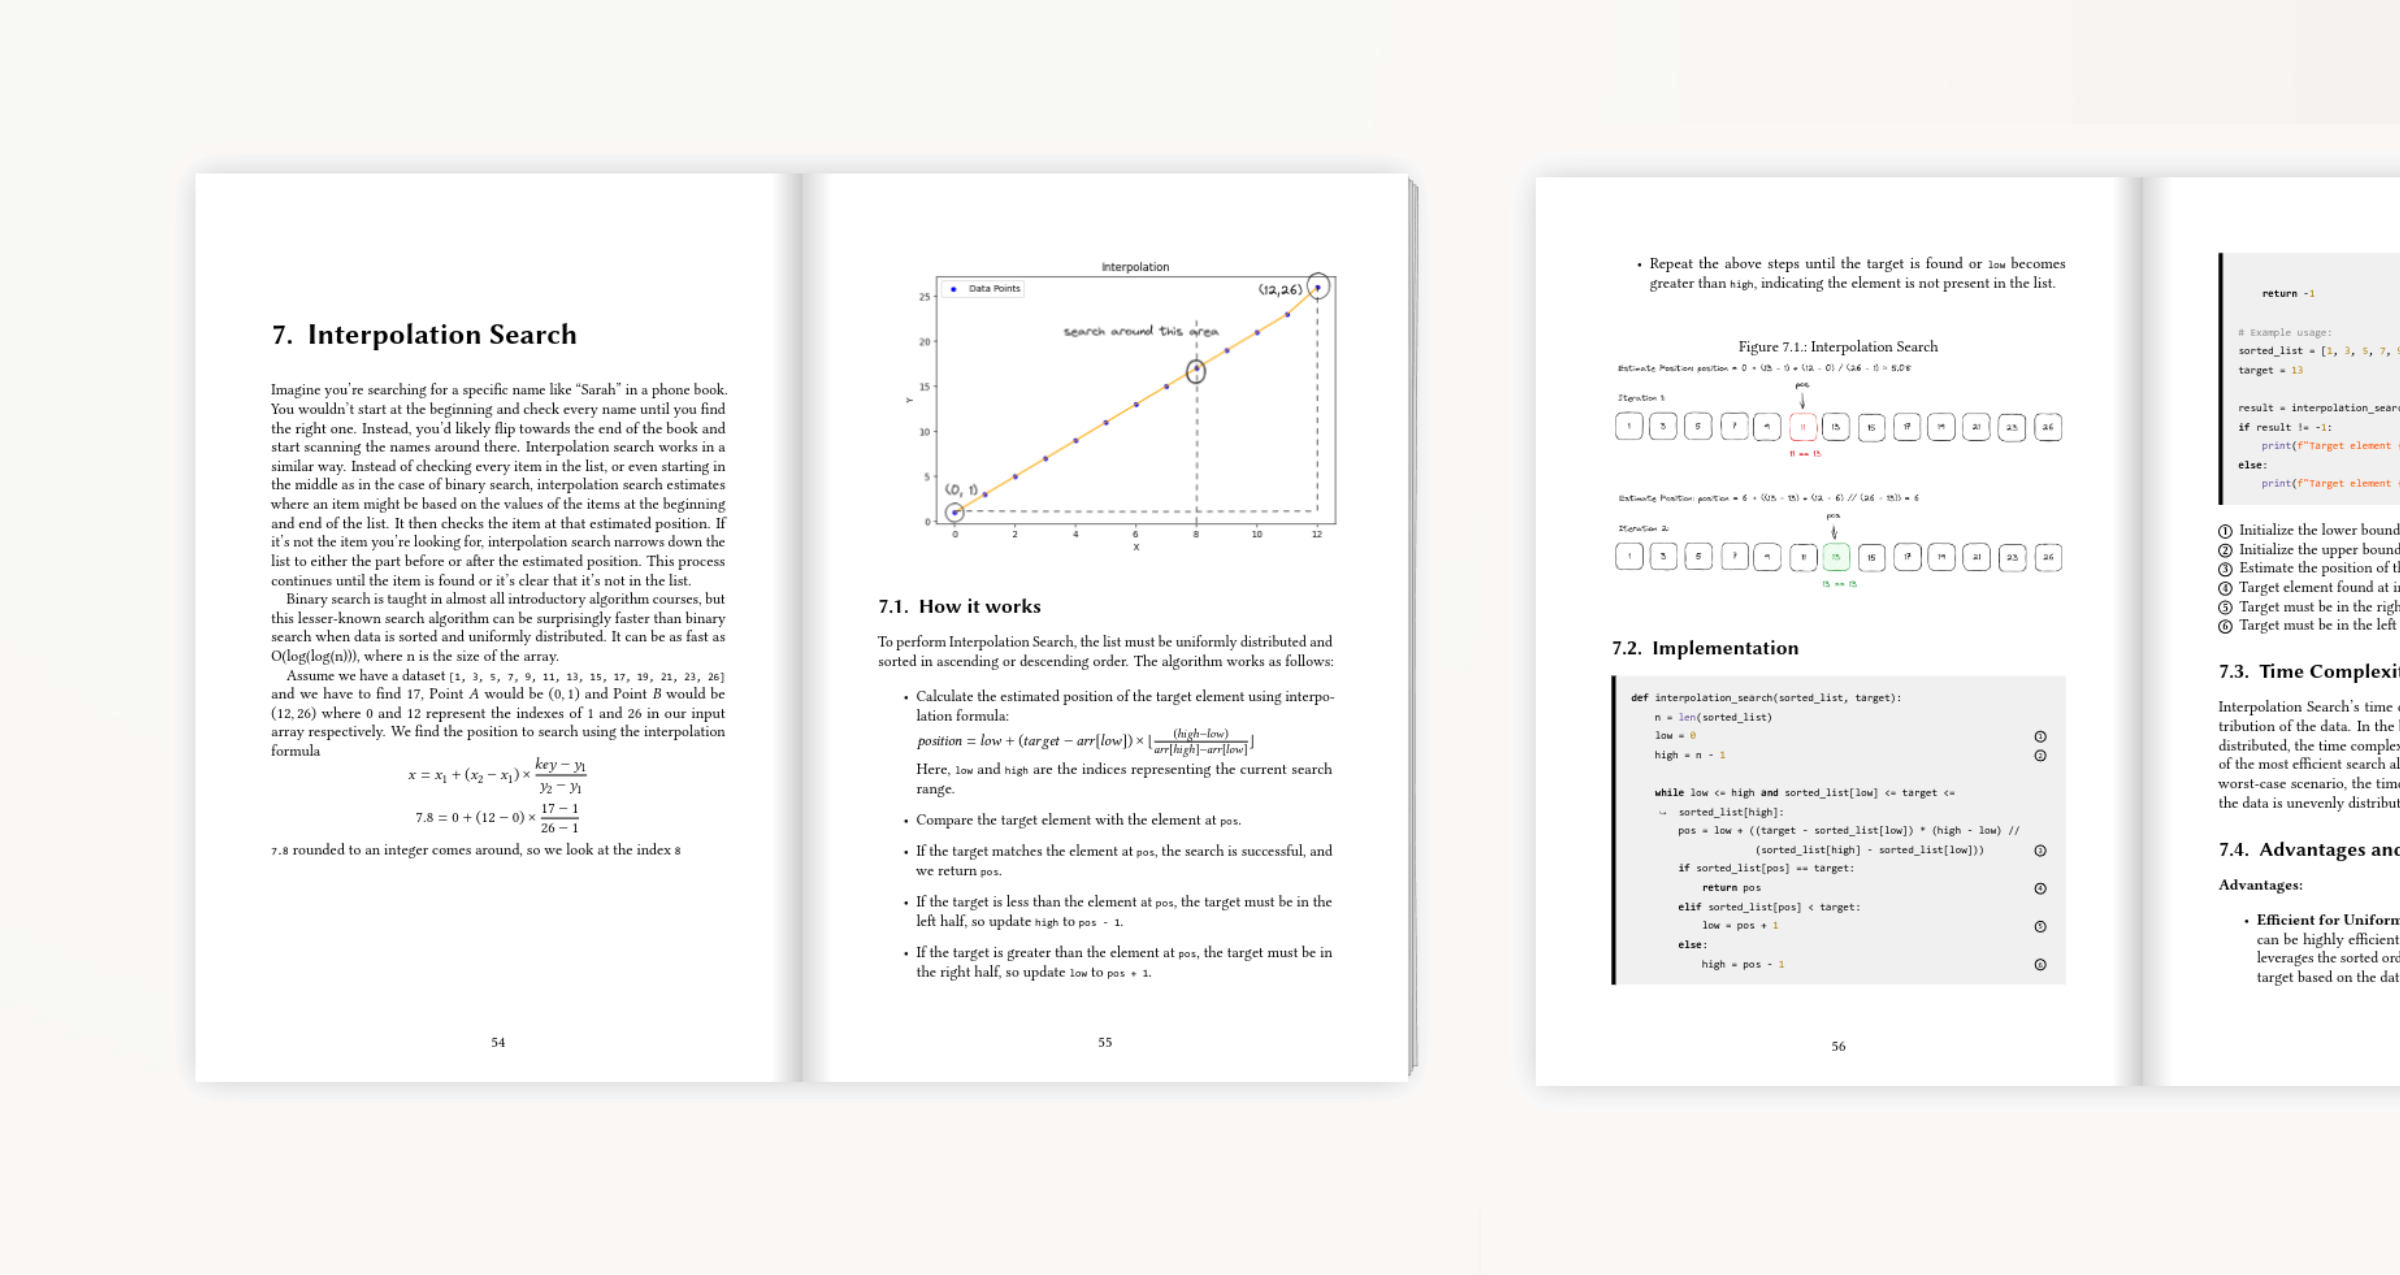 A design systems book spread showing content related to getting started with design systems